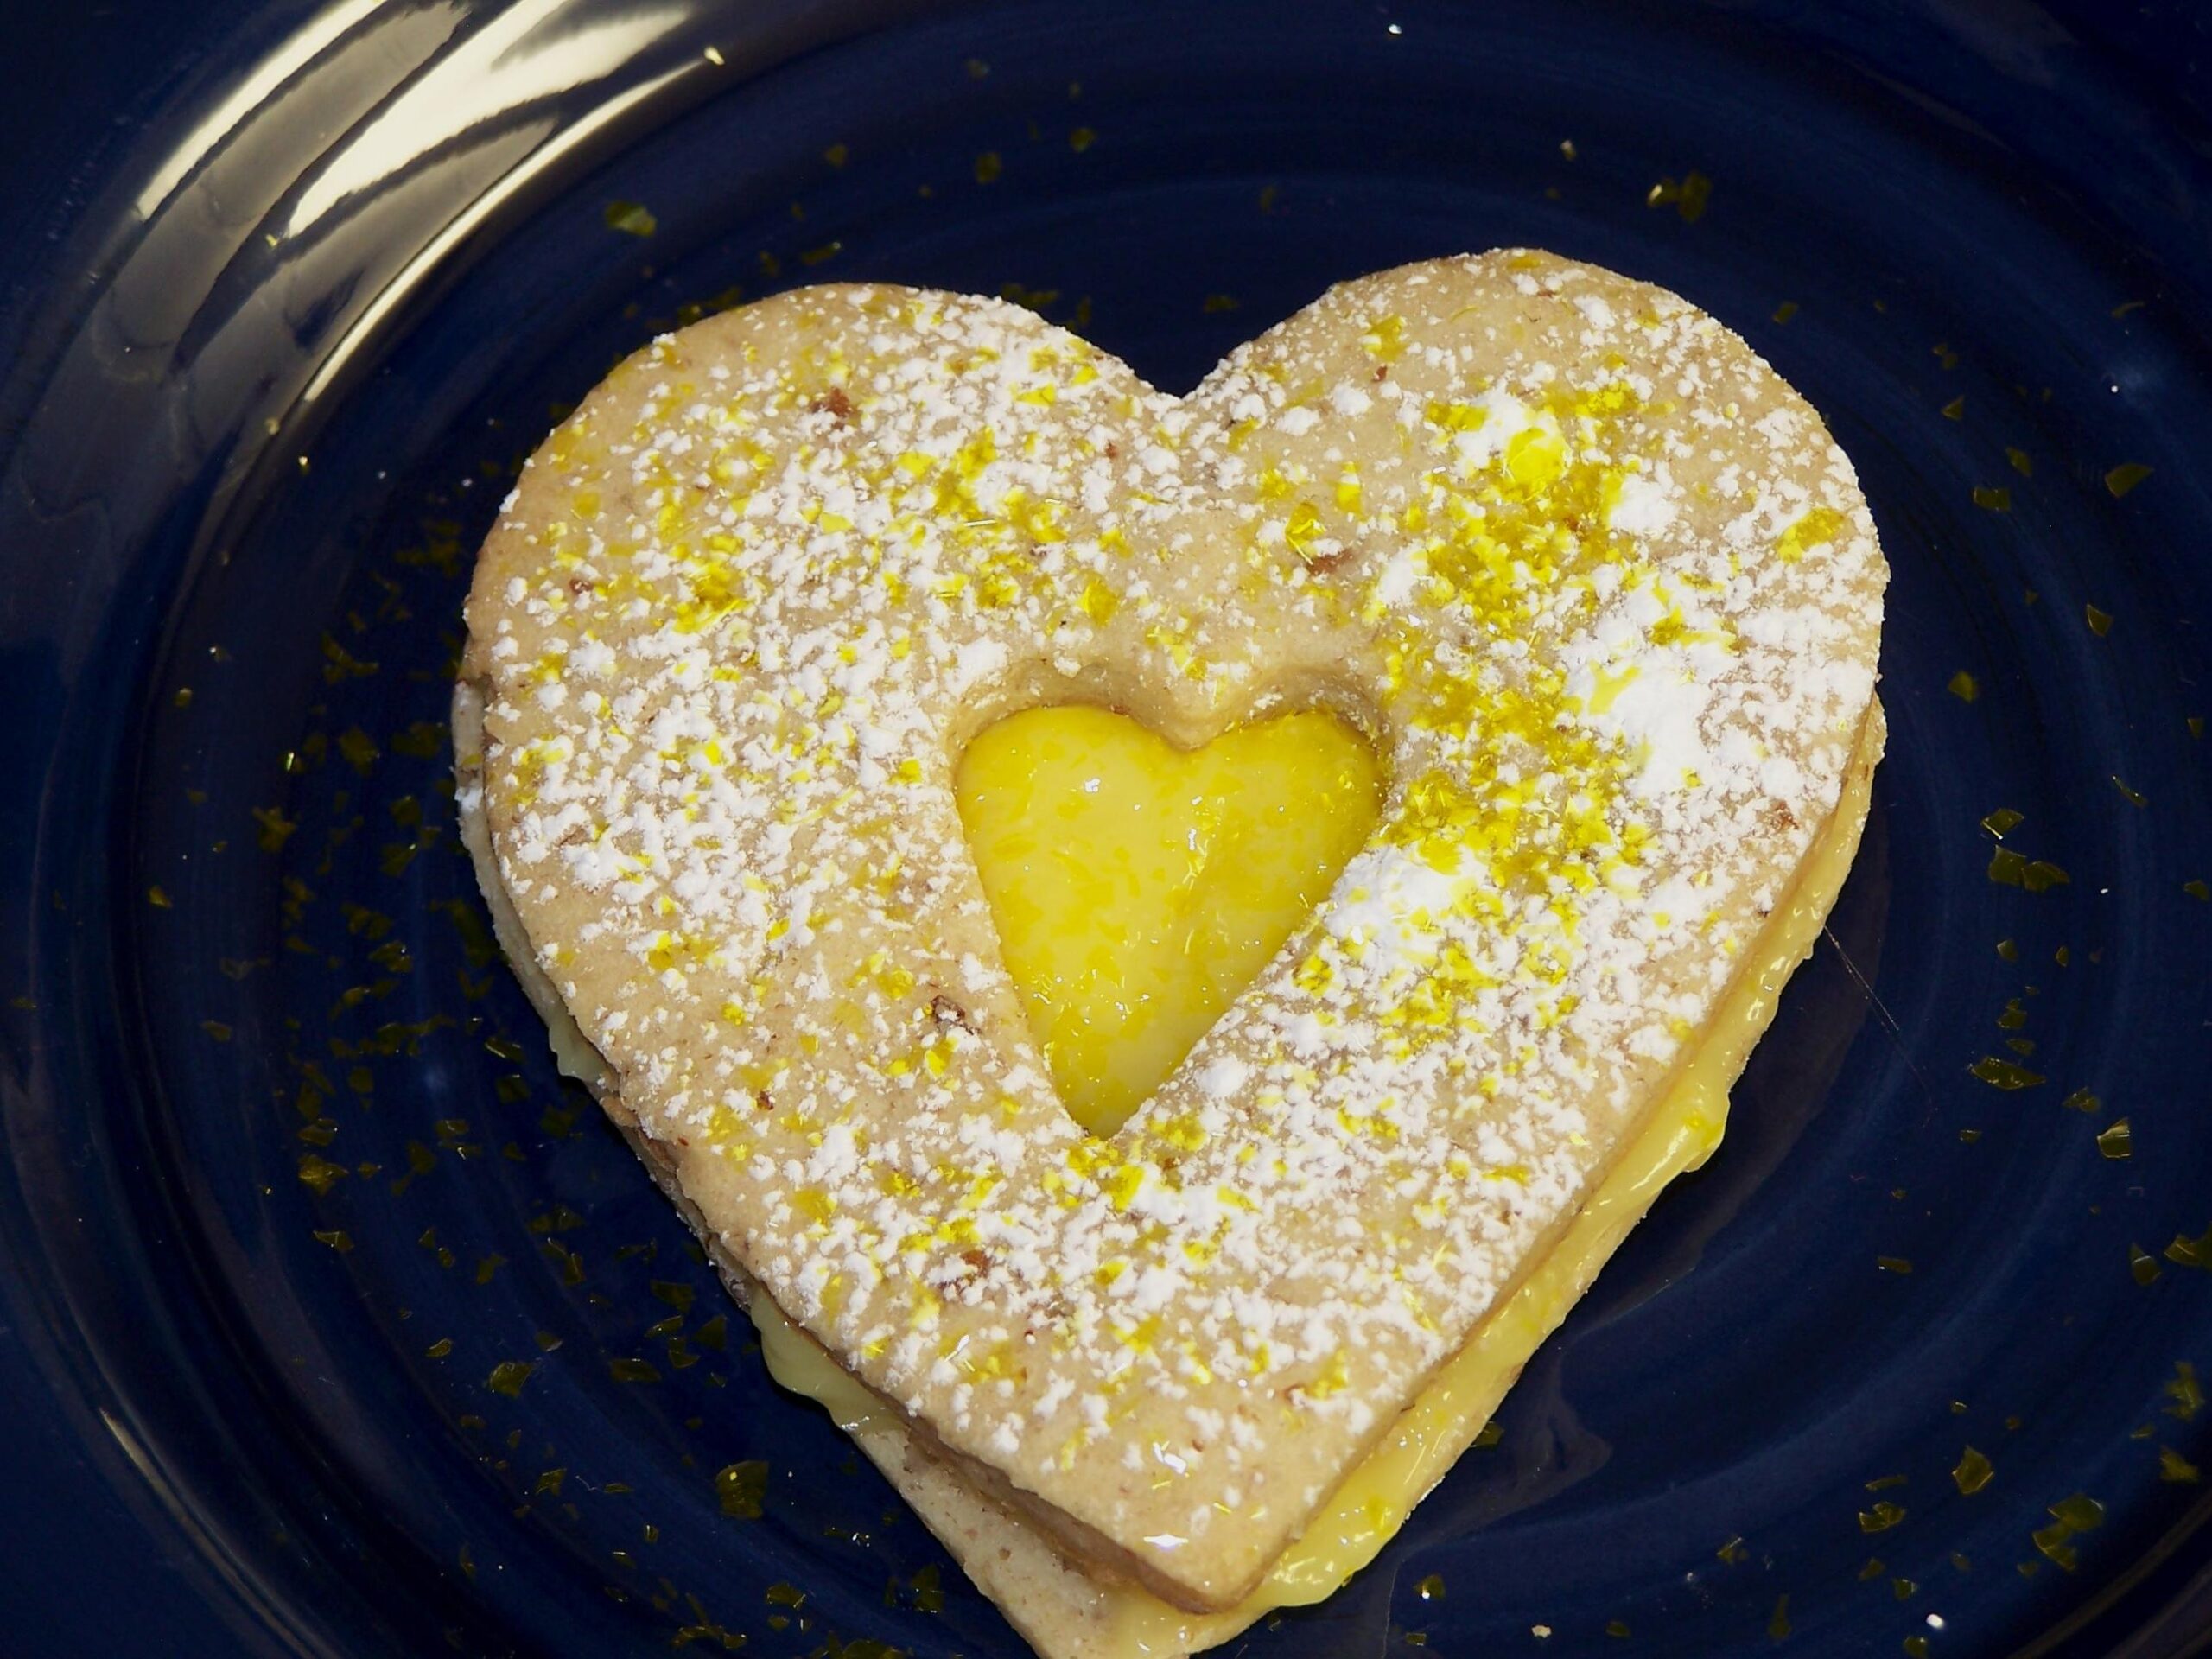  A batch of golden-yellow cookies filled with luscious lemon curd.